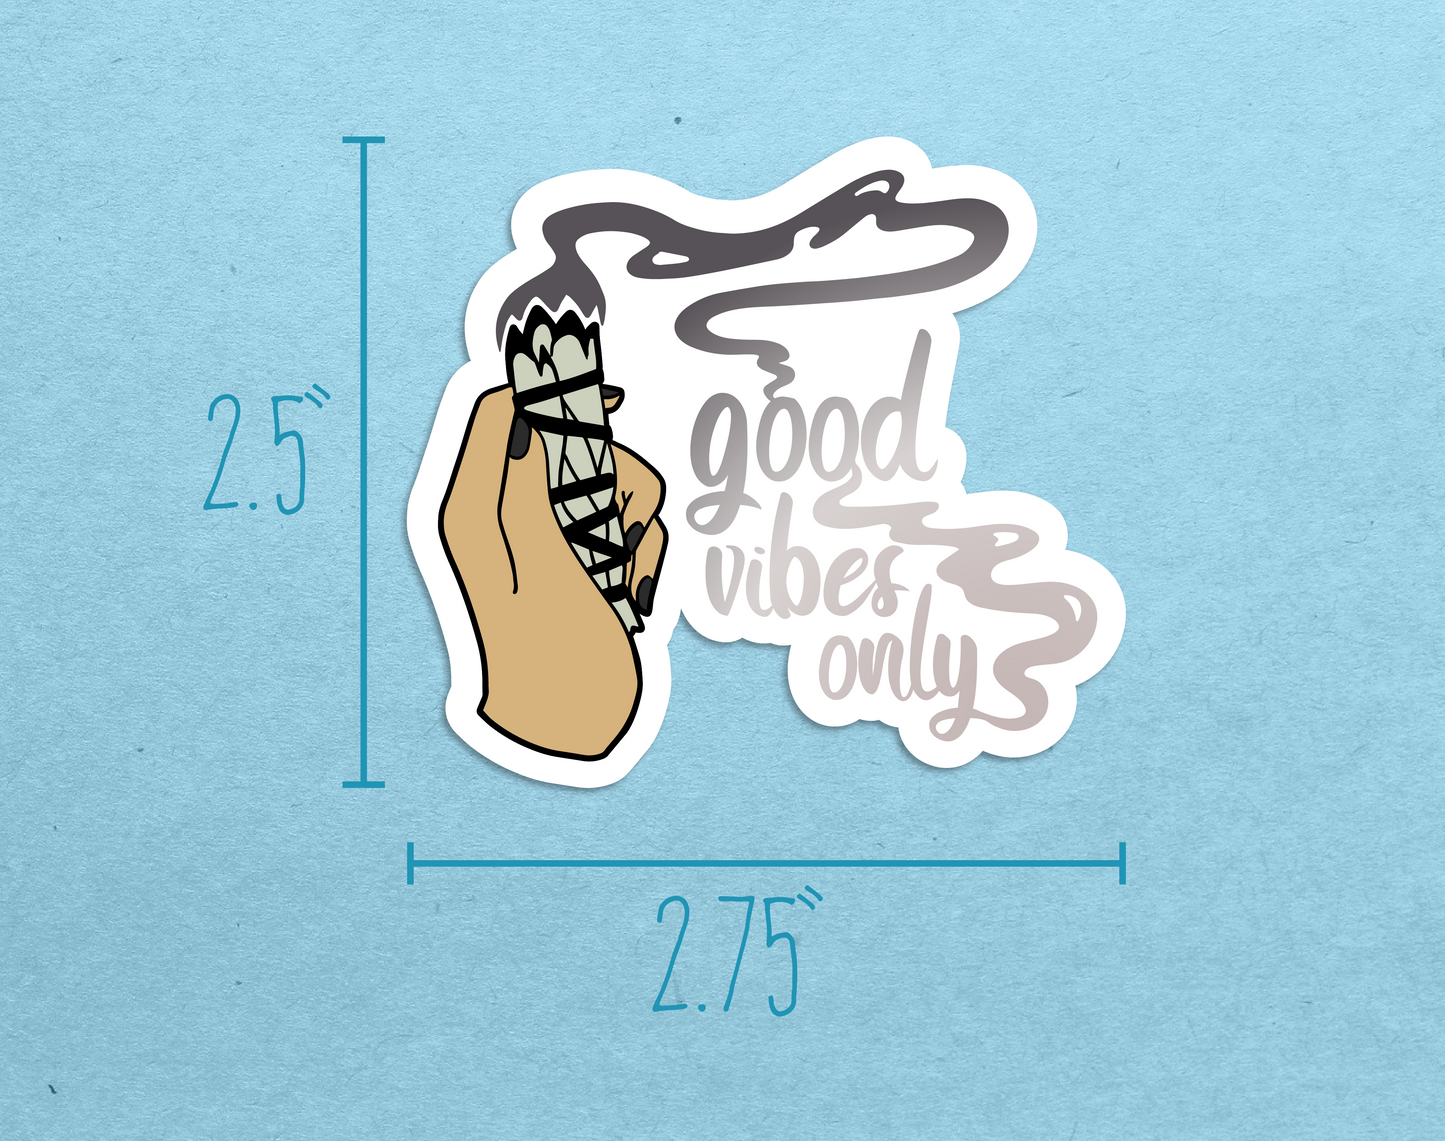 A diecut sticker featuring a picture of a hand holding a sage stick and text reading "Good Vibes Only" next to measurements reading 2.5" high and 2.75" wide